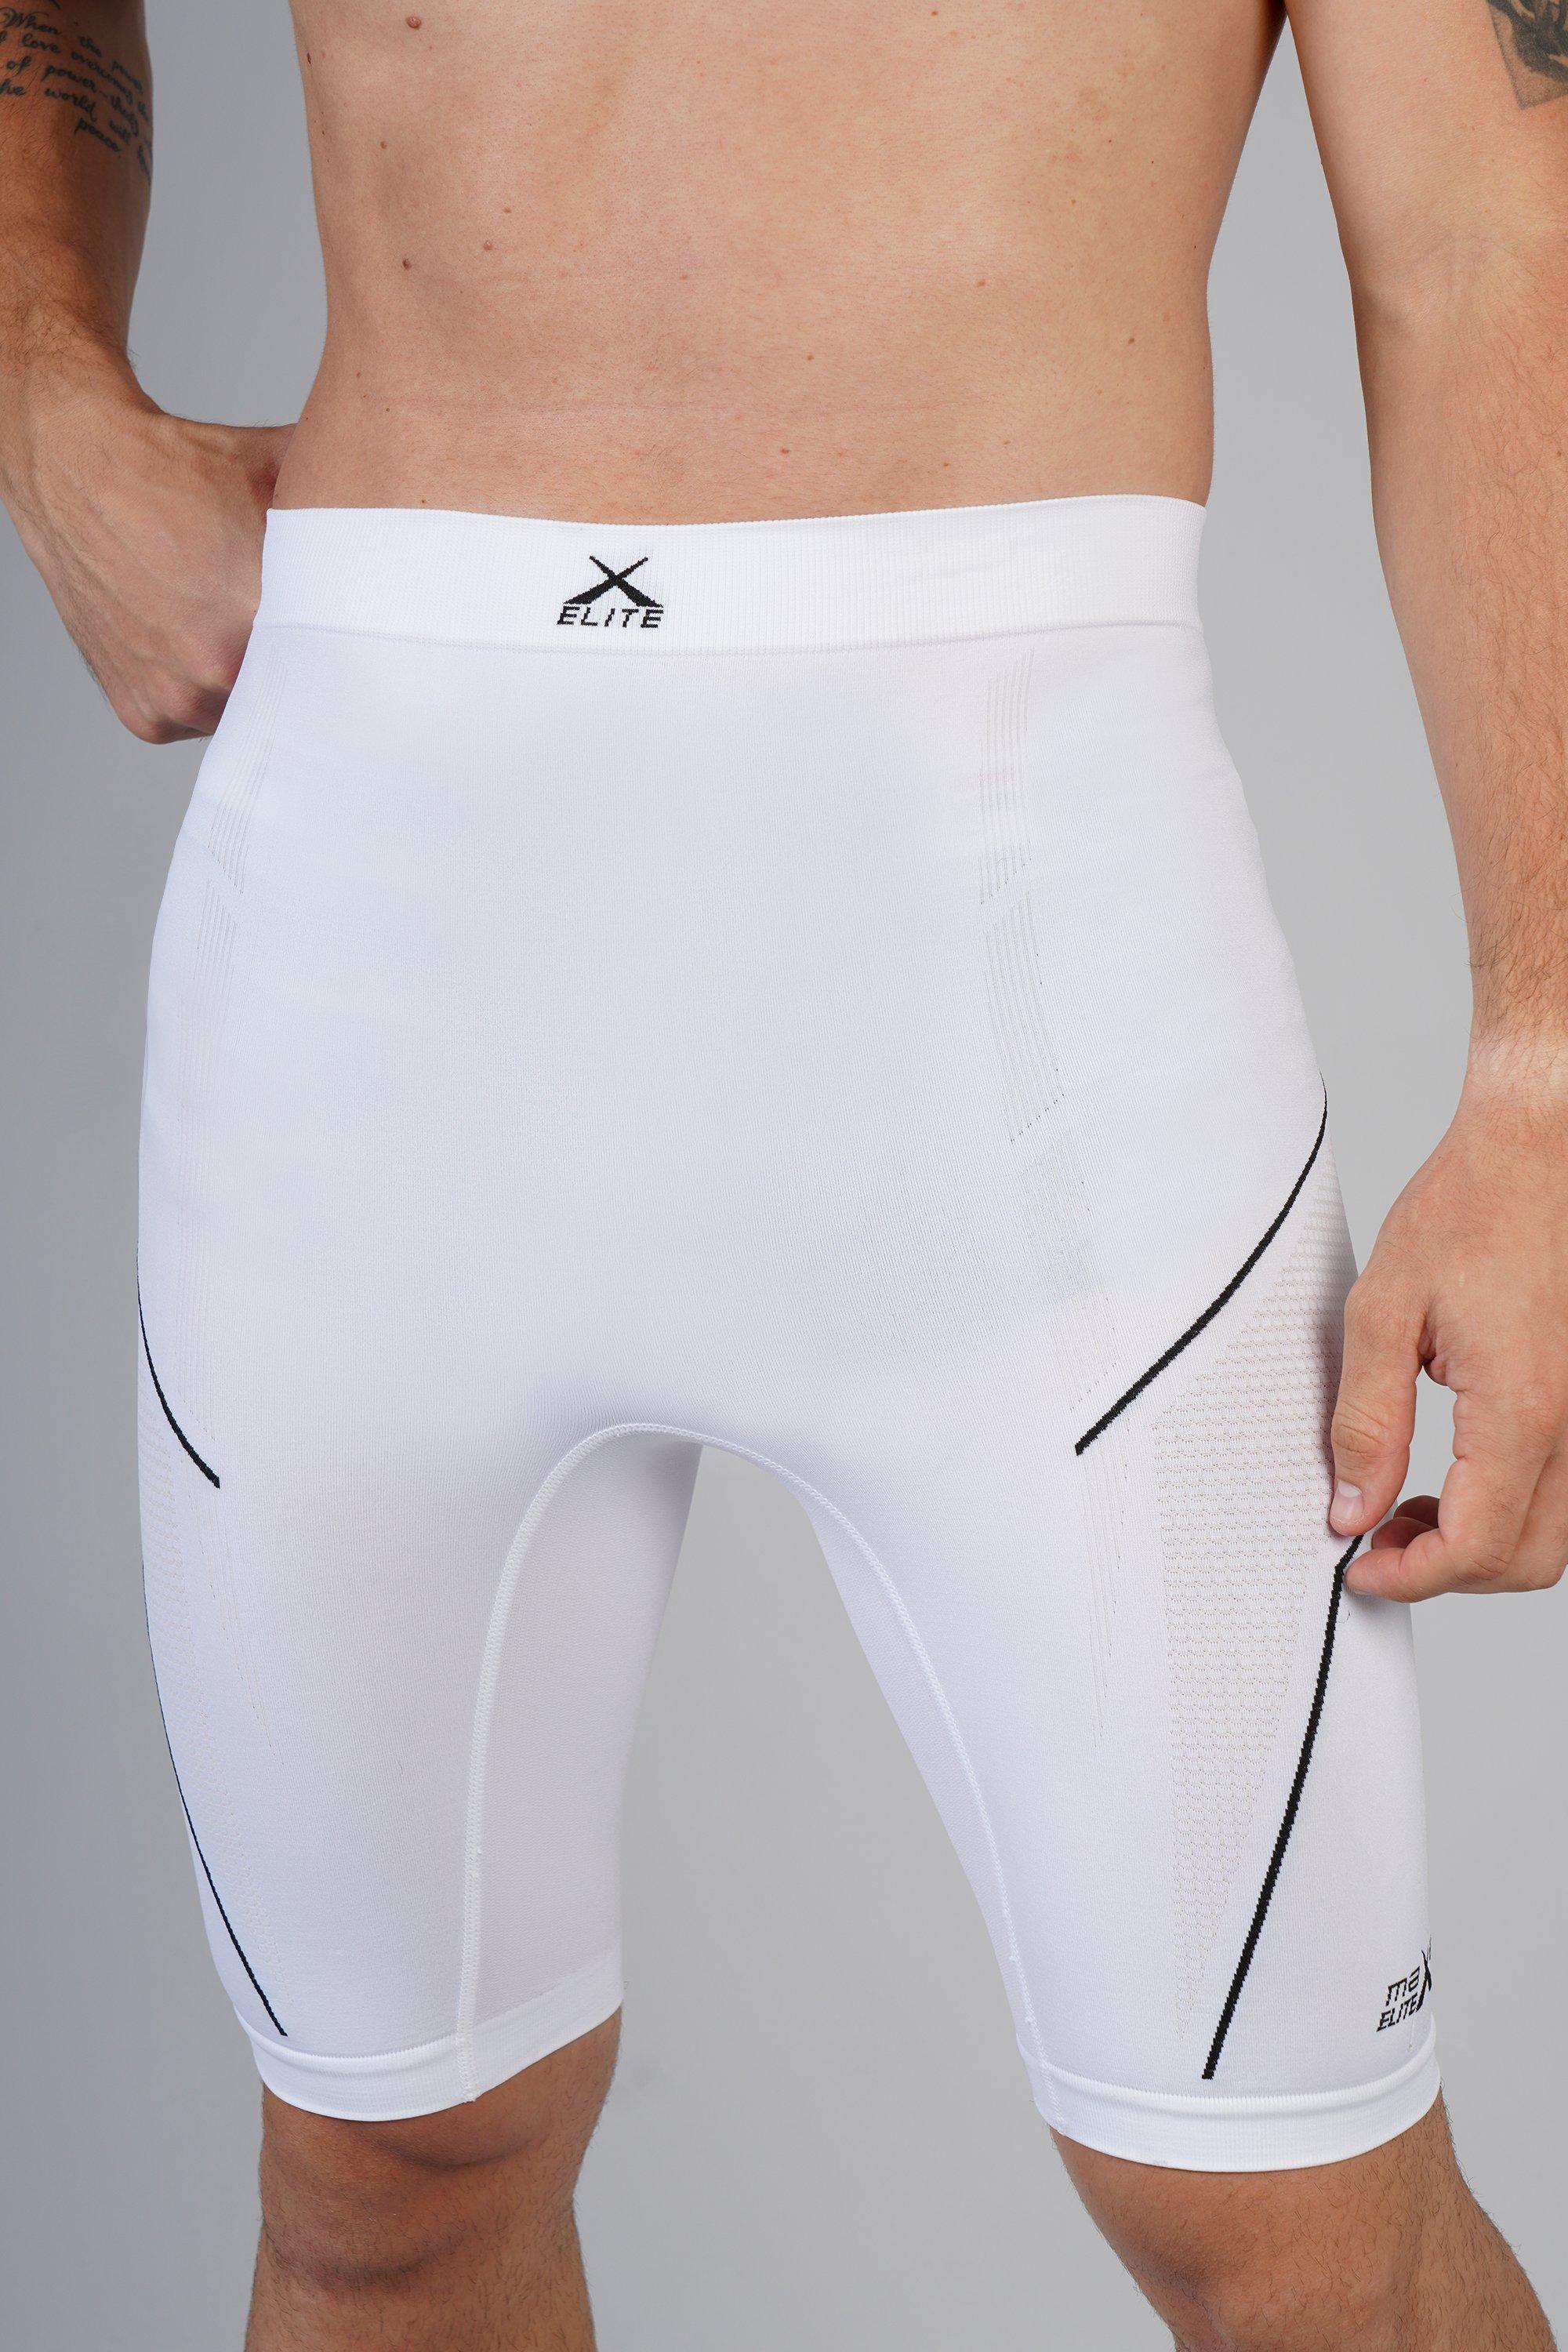 Mr Price Sport - Athlete-approved compression for every